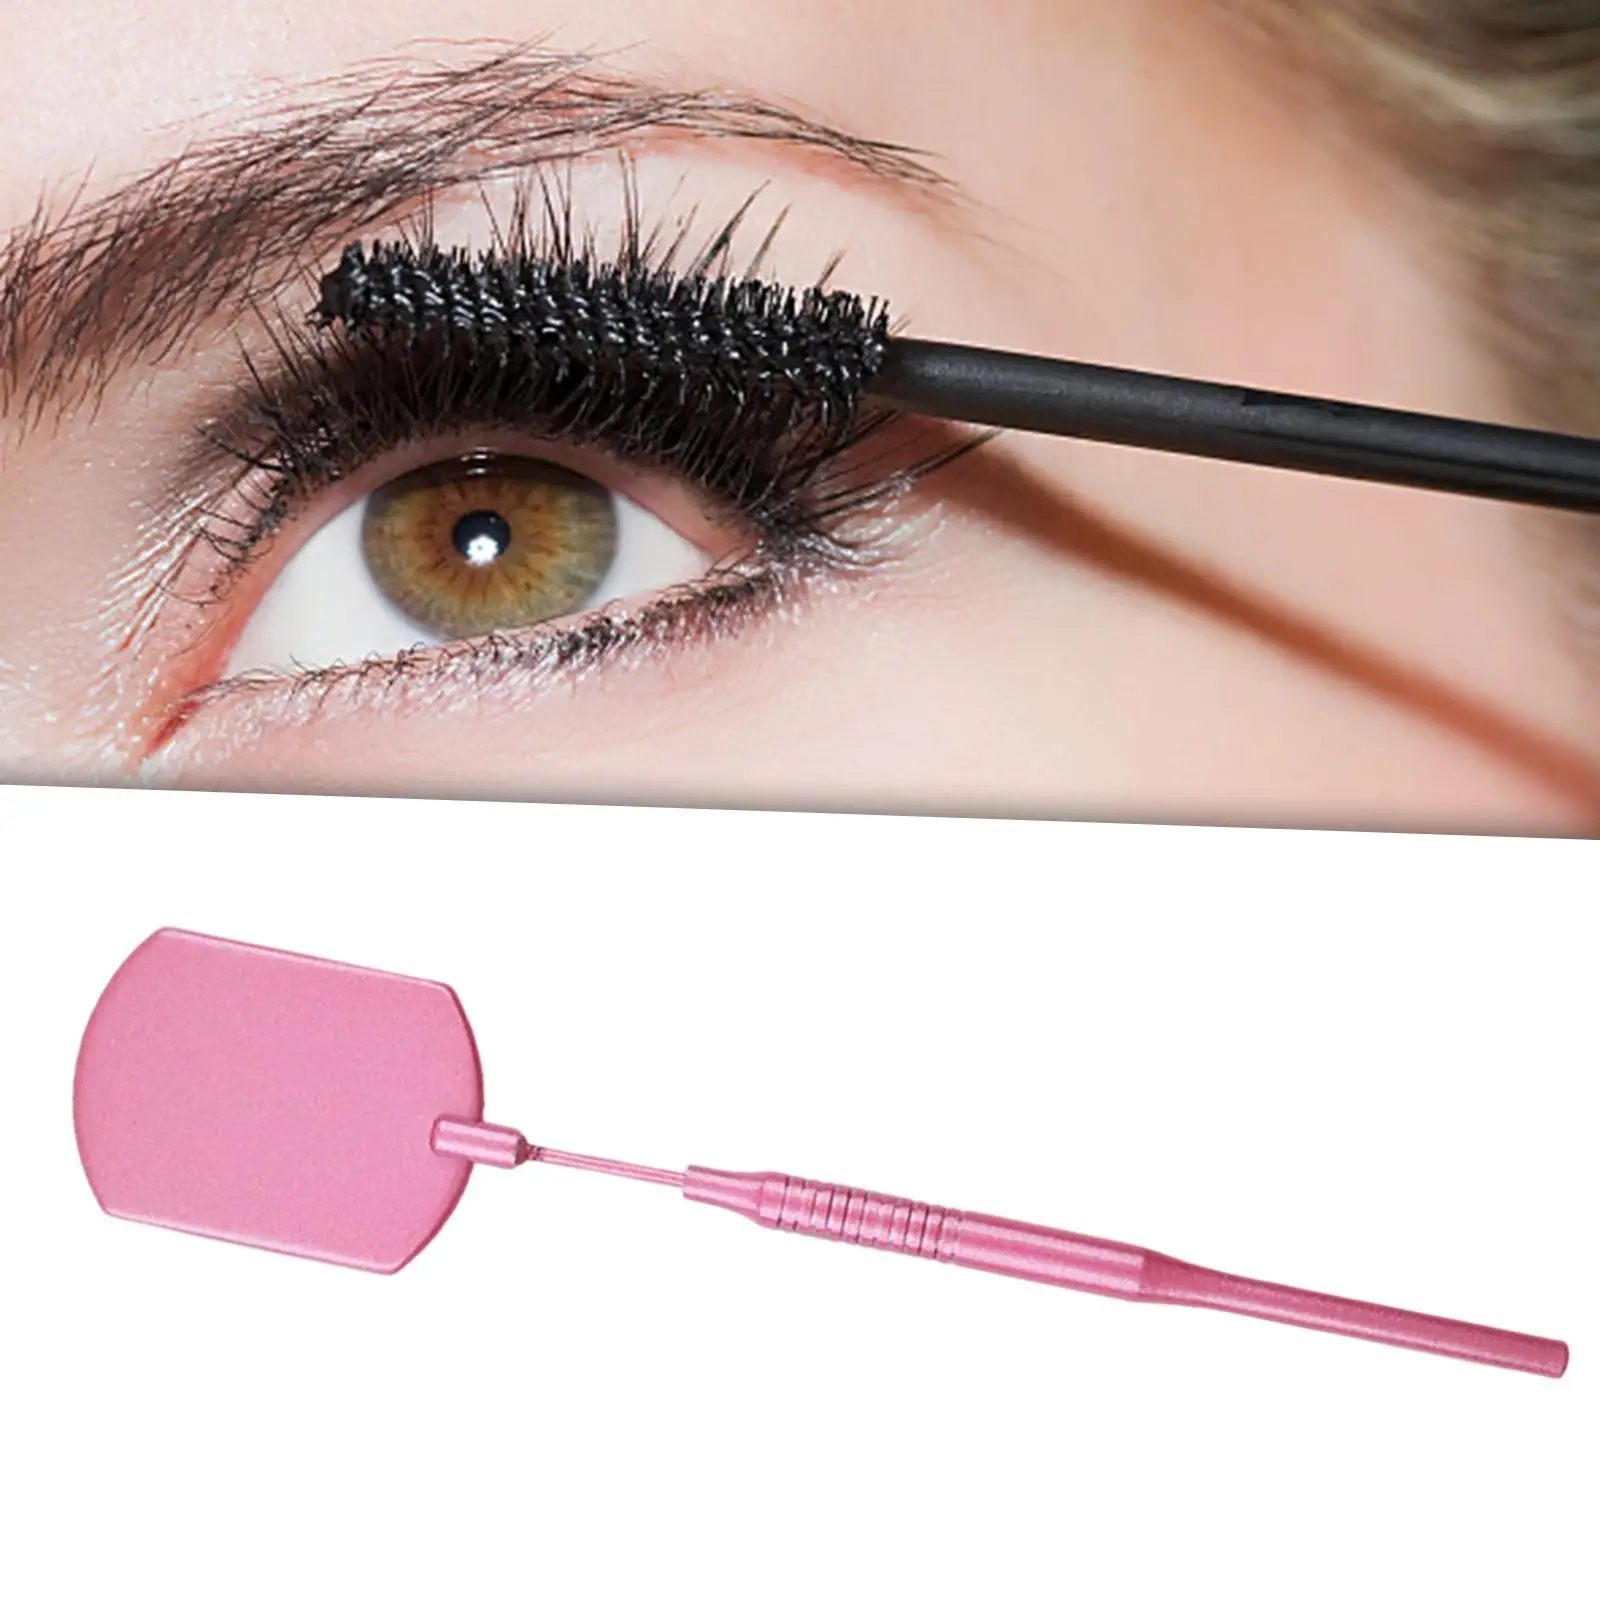 Eyelash Mirror Lash Tool Square Mirror Professional for Women Girls Detachable Easily Adjust to Any Angles Eyes Makeup Supplies